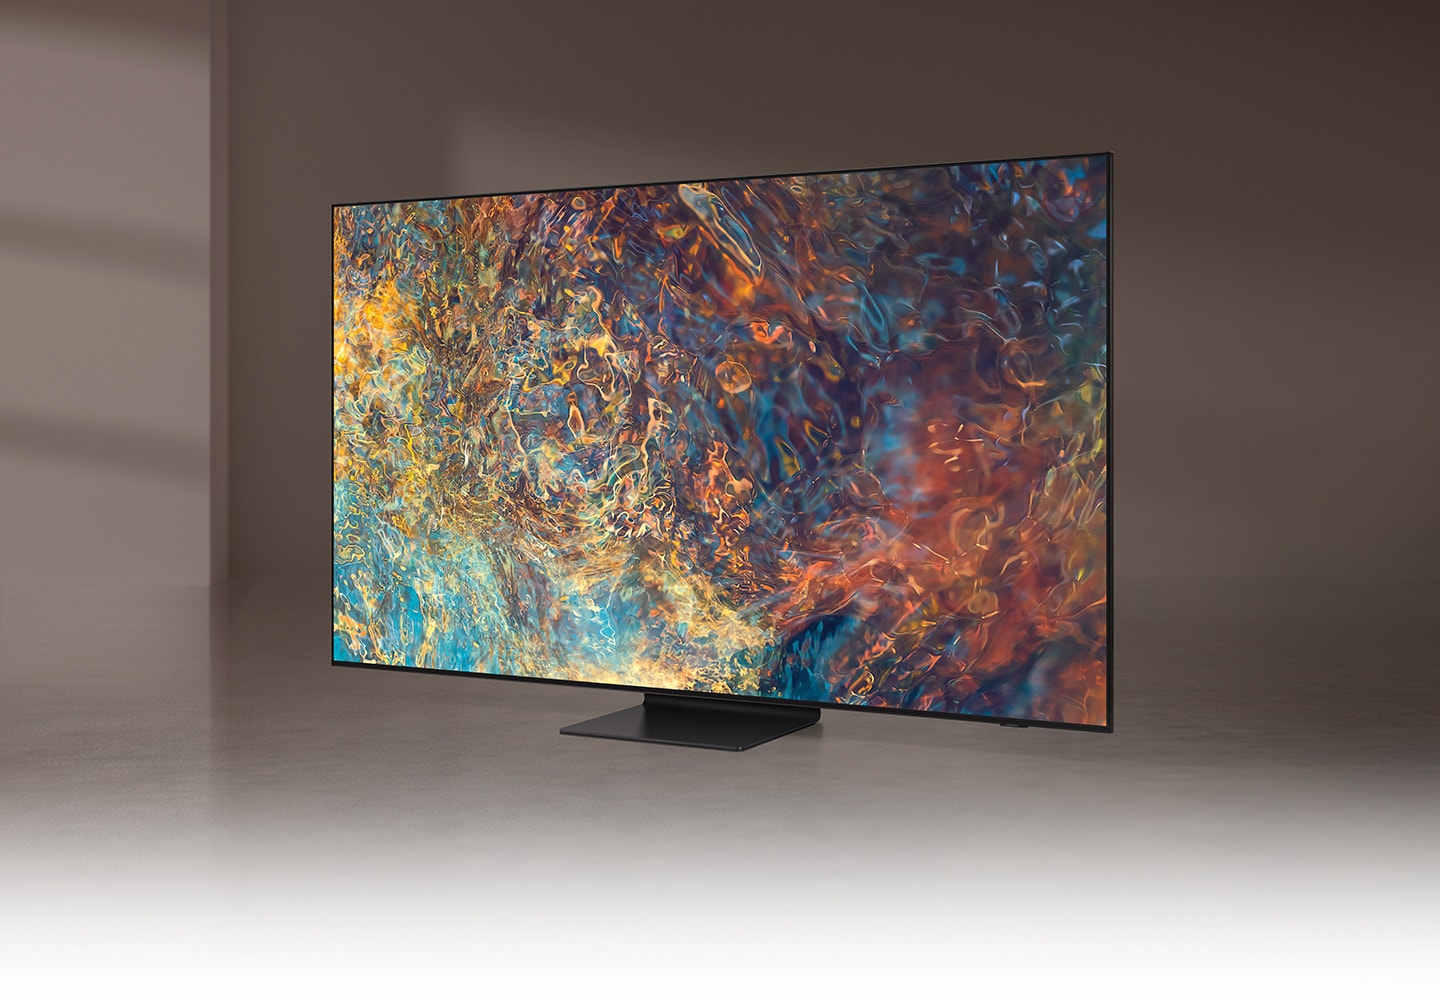 Our most powerful 4K experience on a Samsung TV yet